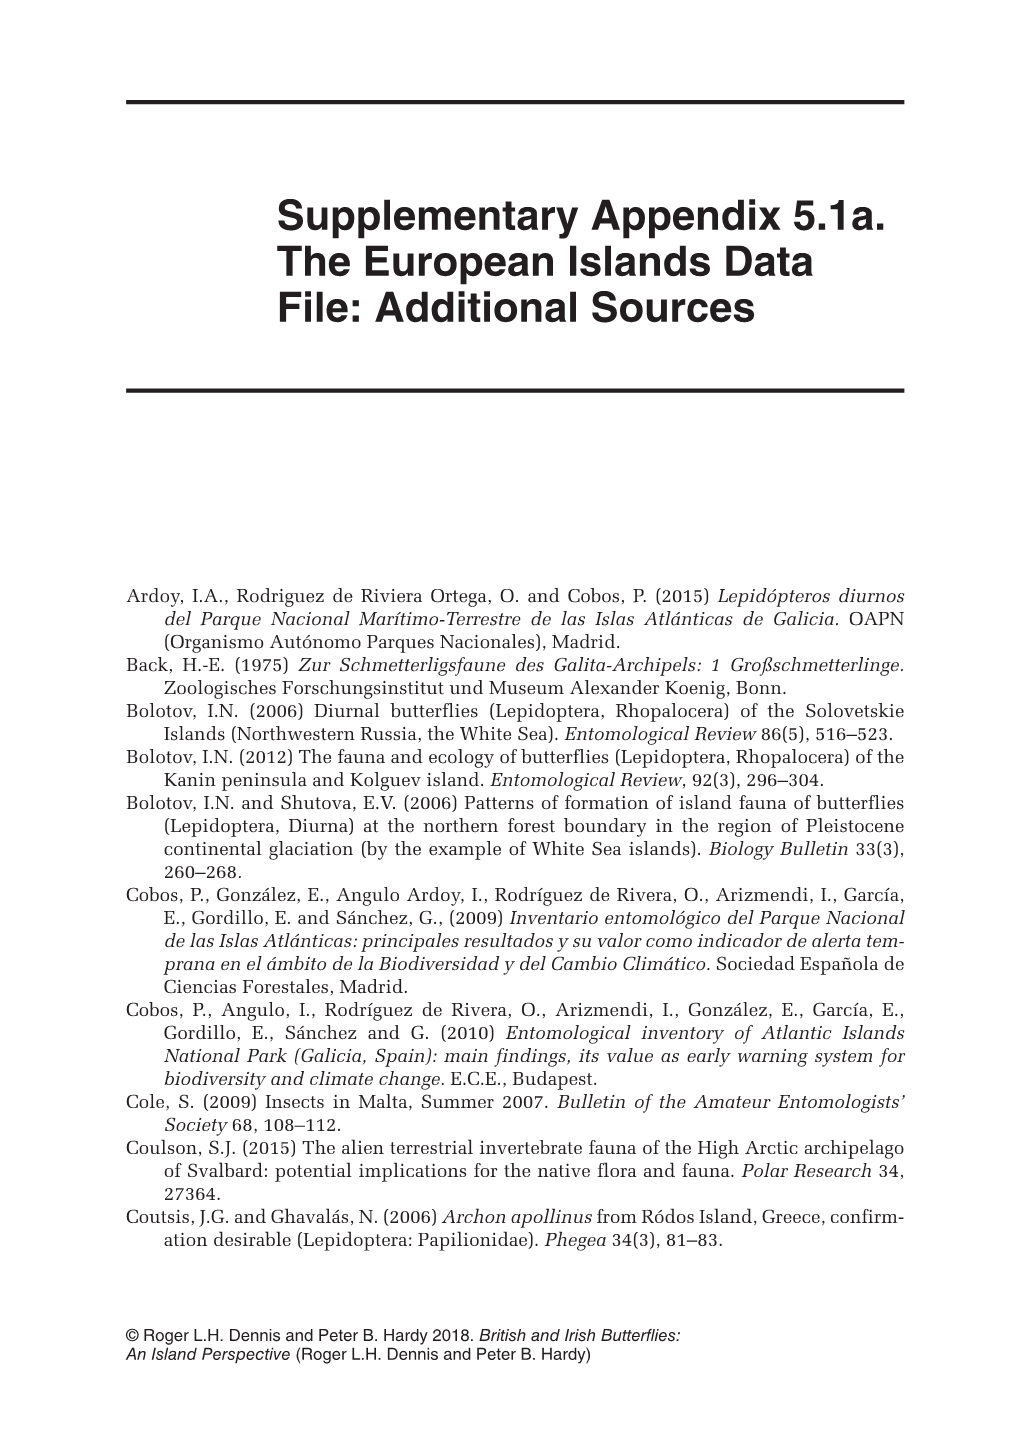 Supplementary Appendix 5.1A. the European Islands Data File: Additional Sources